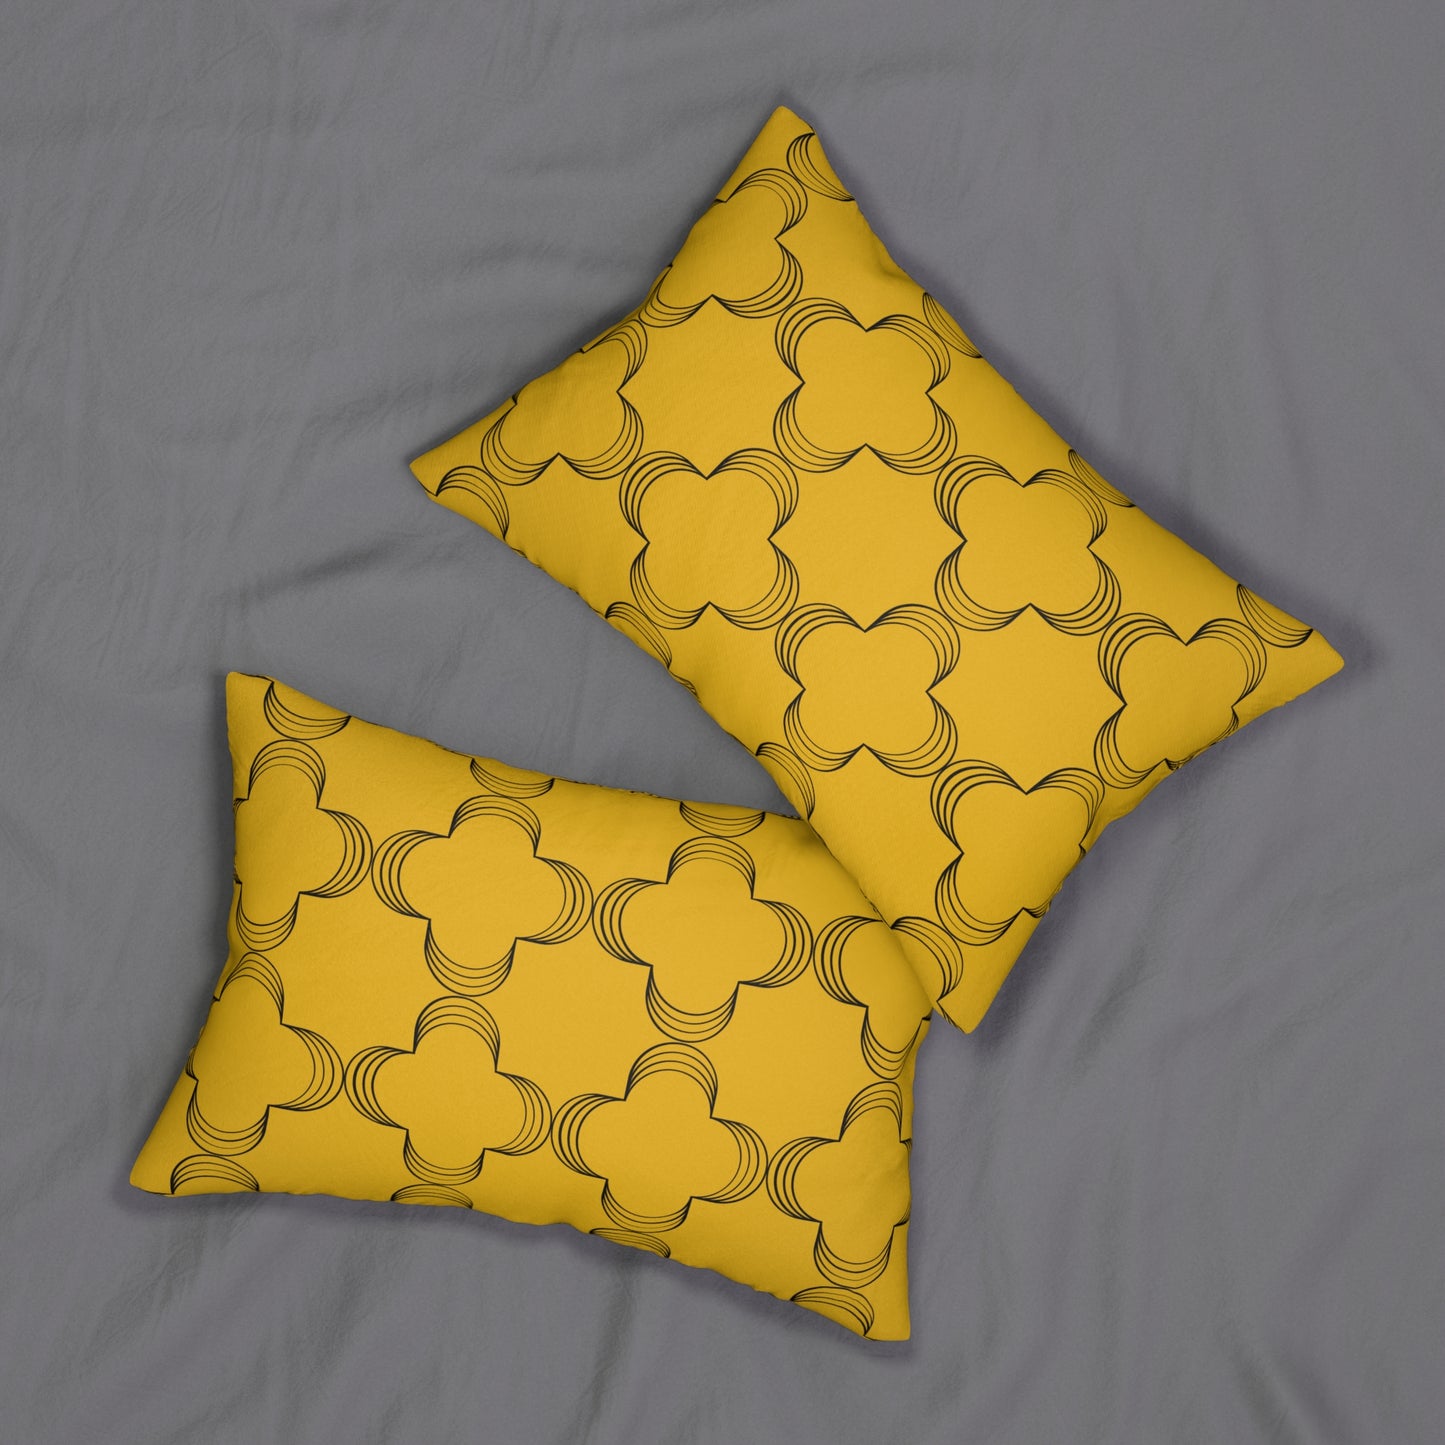 Geometric Gold (Matching The Gathering Place) Accent Pillow